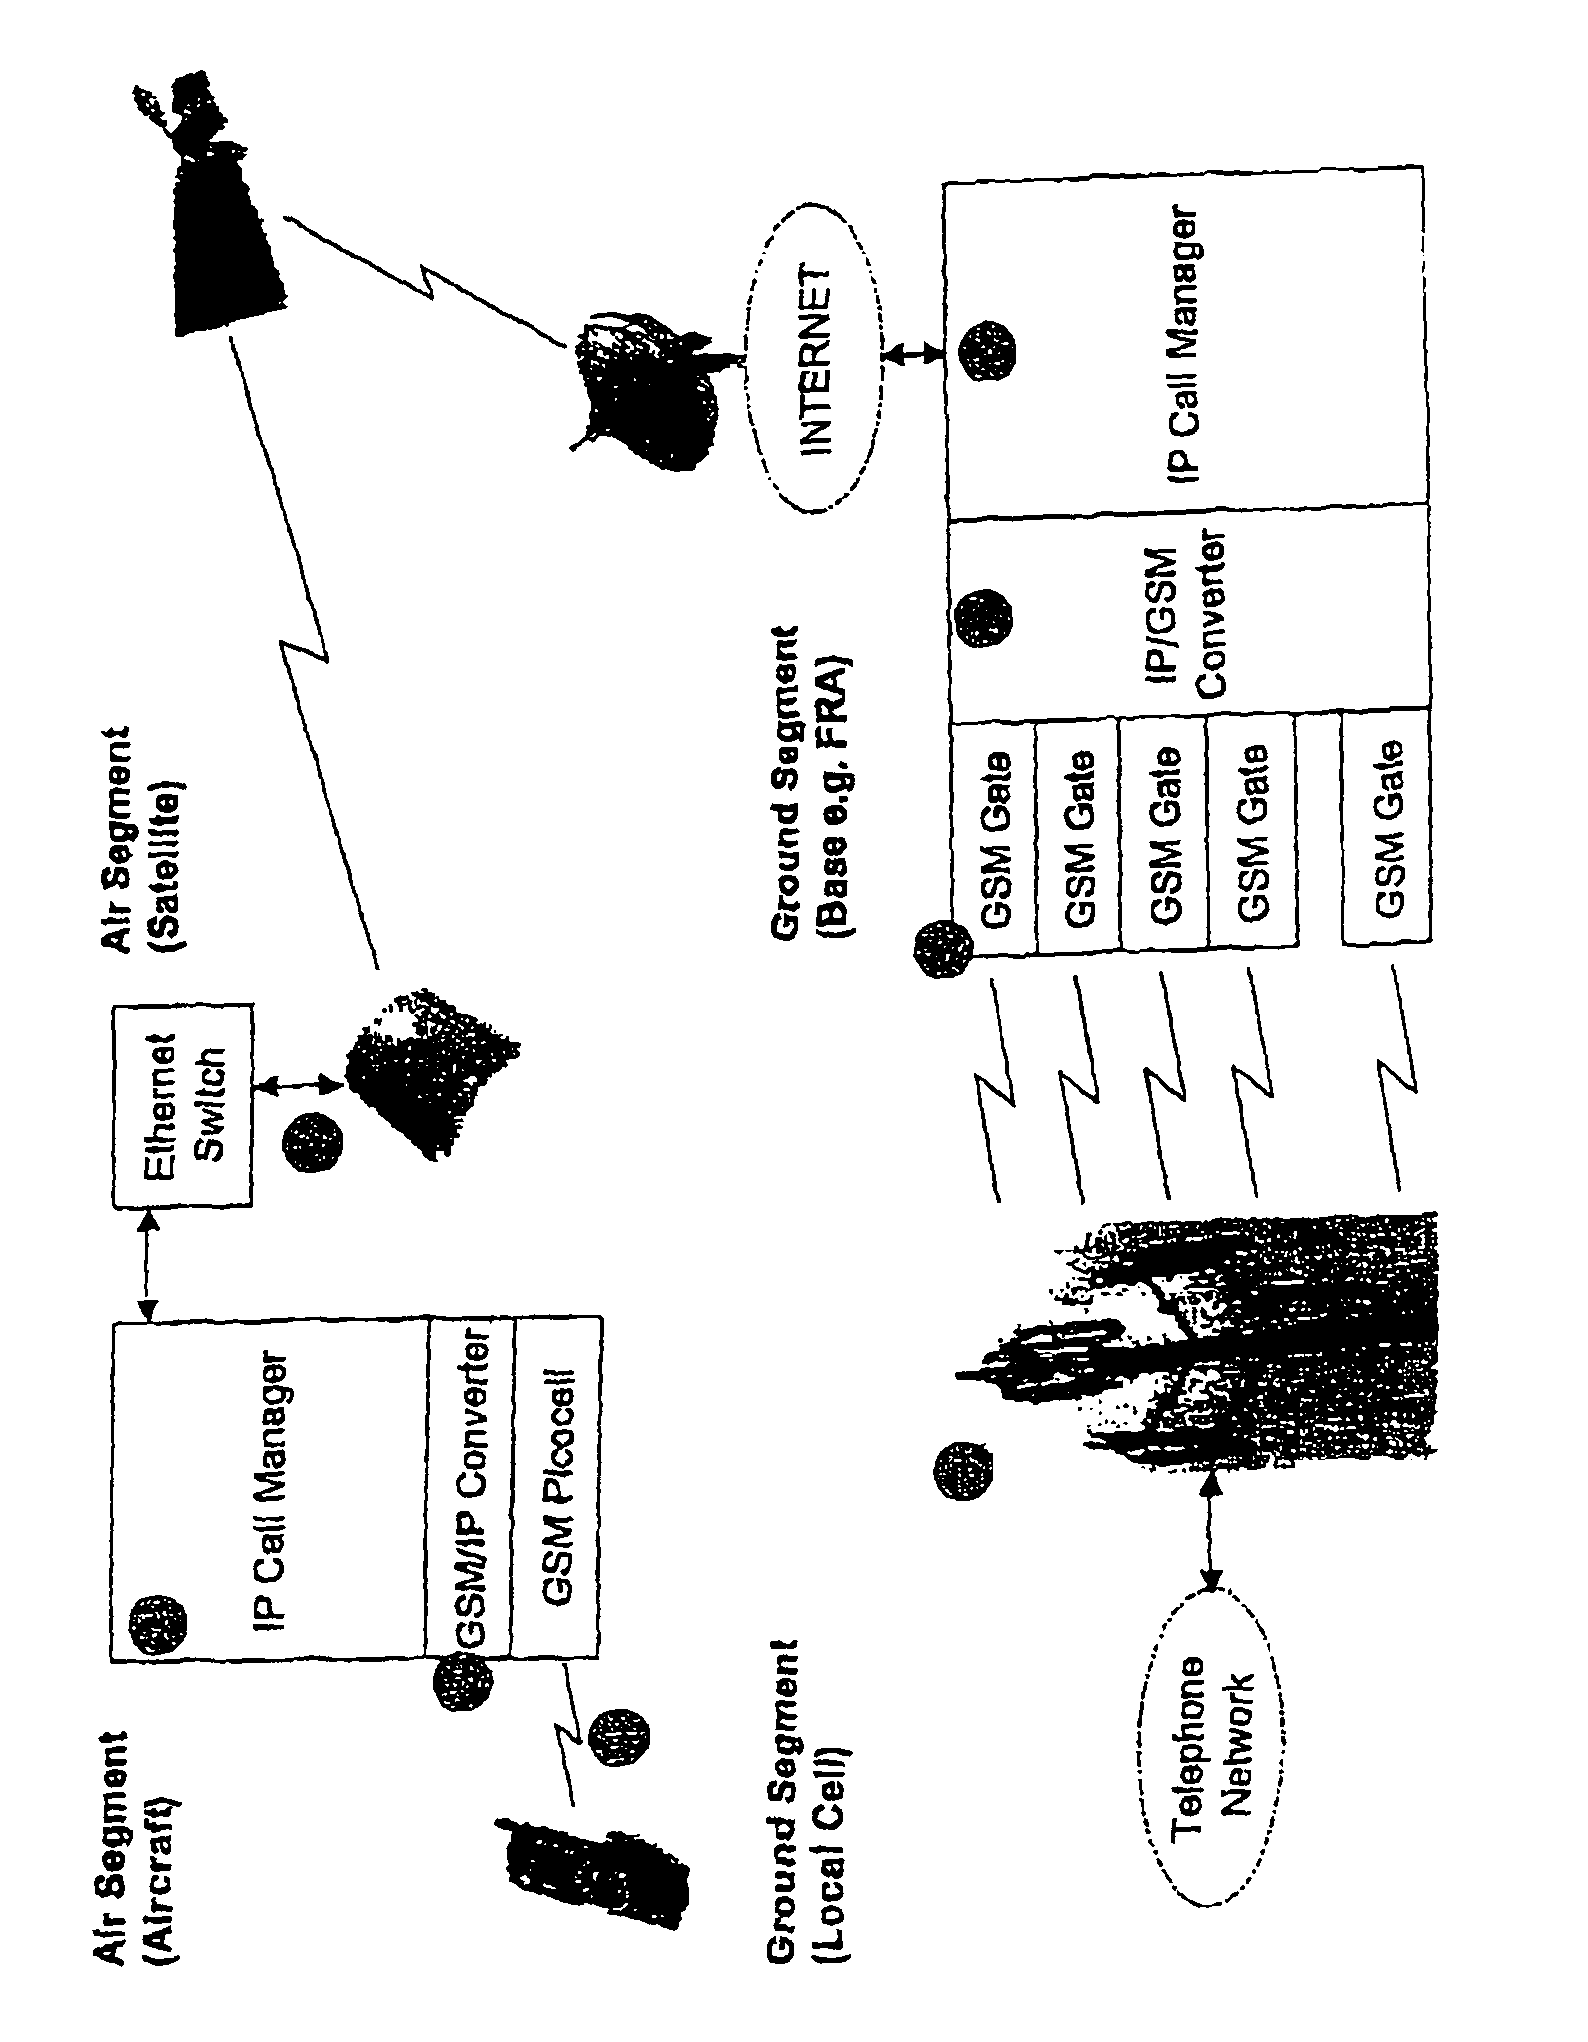 System and method for using a cellular telephone in a mobile vehicle